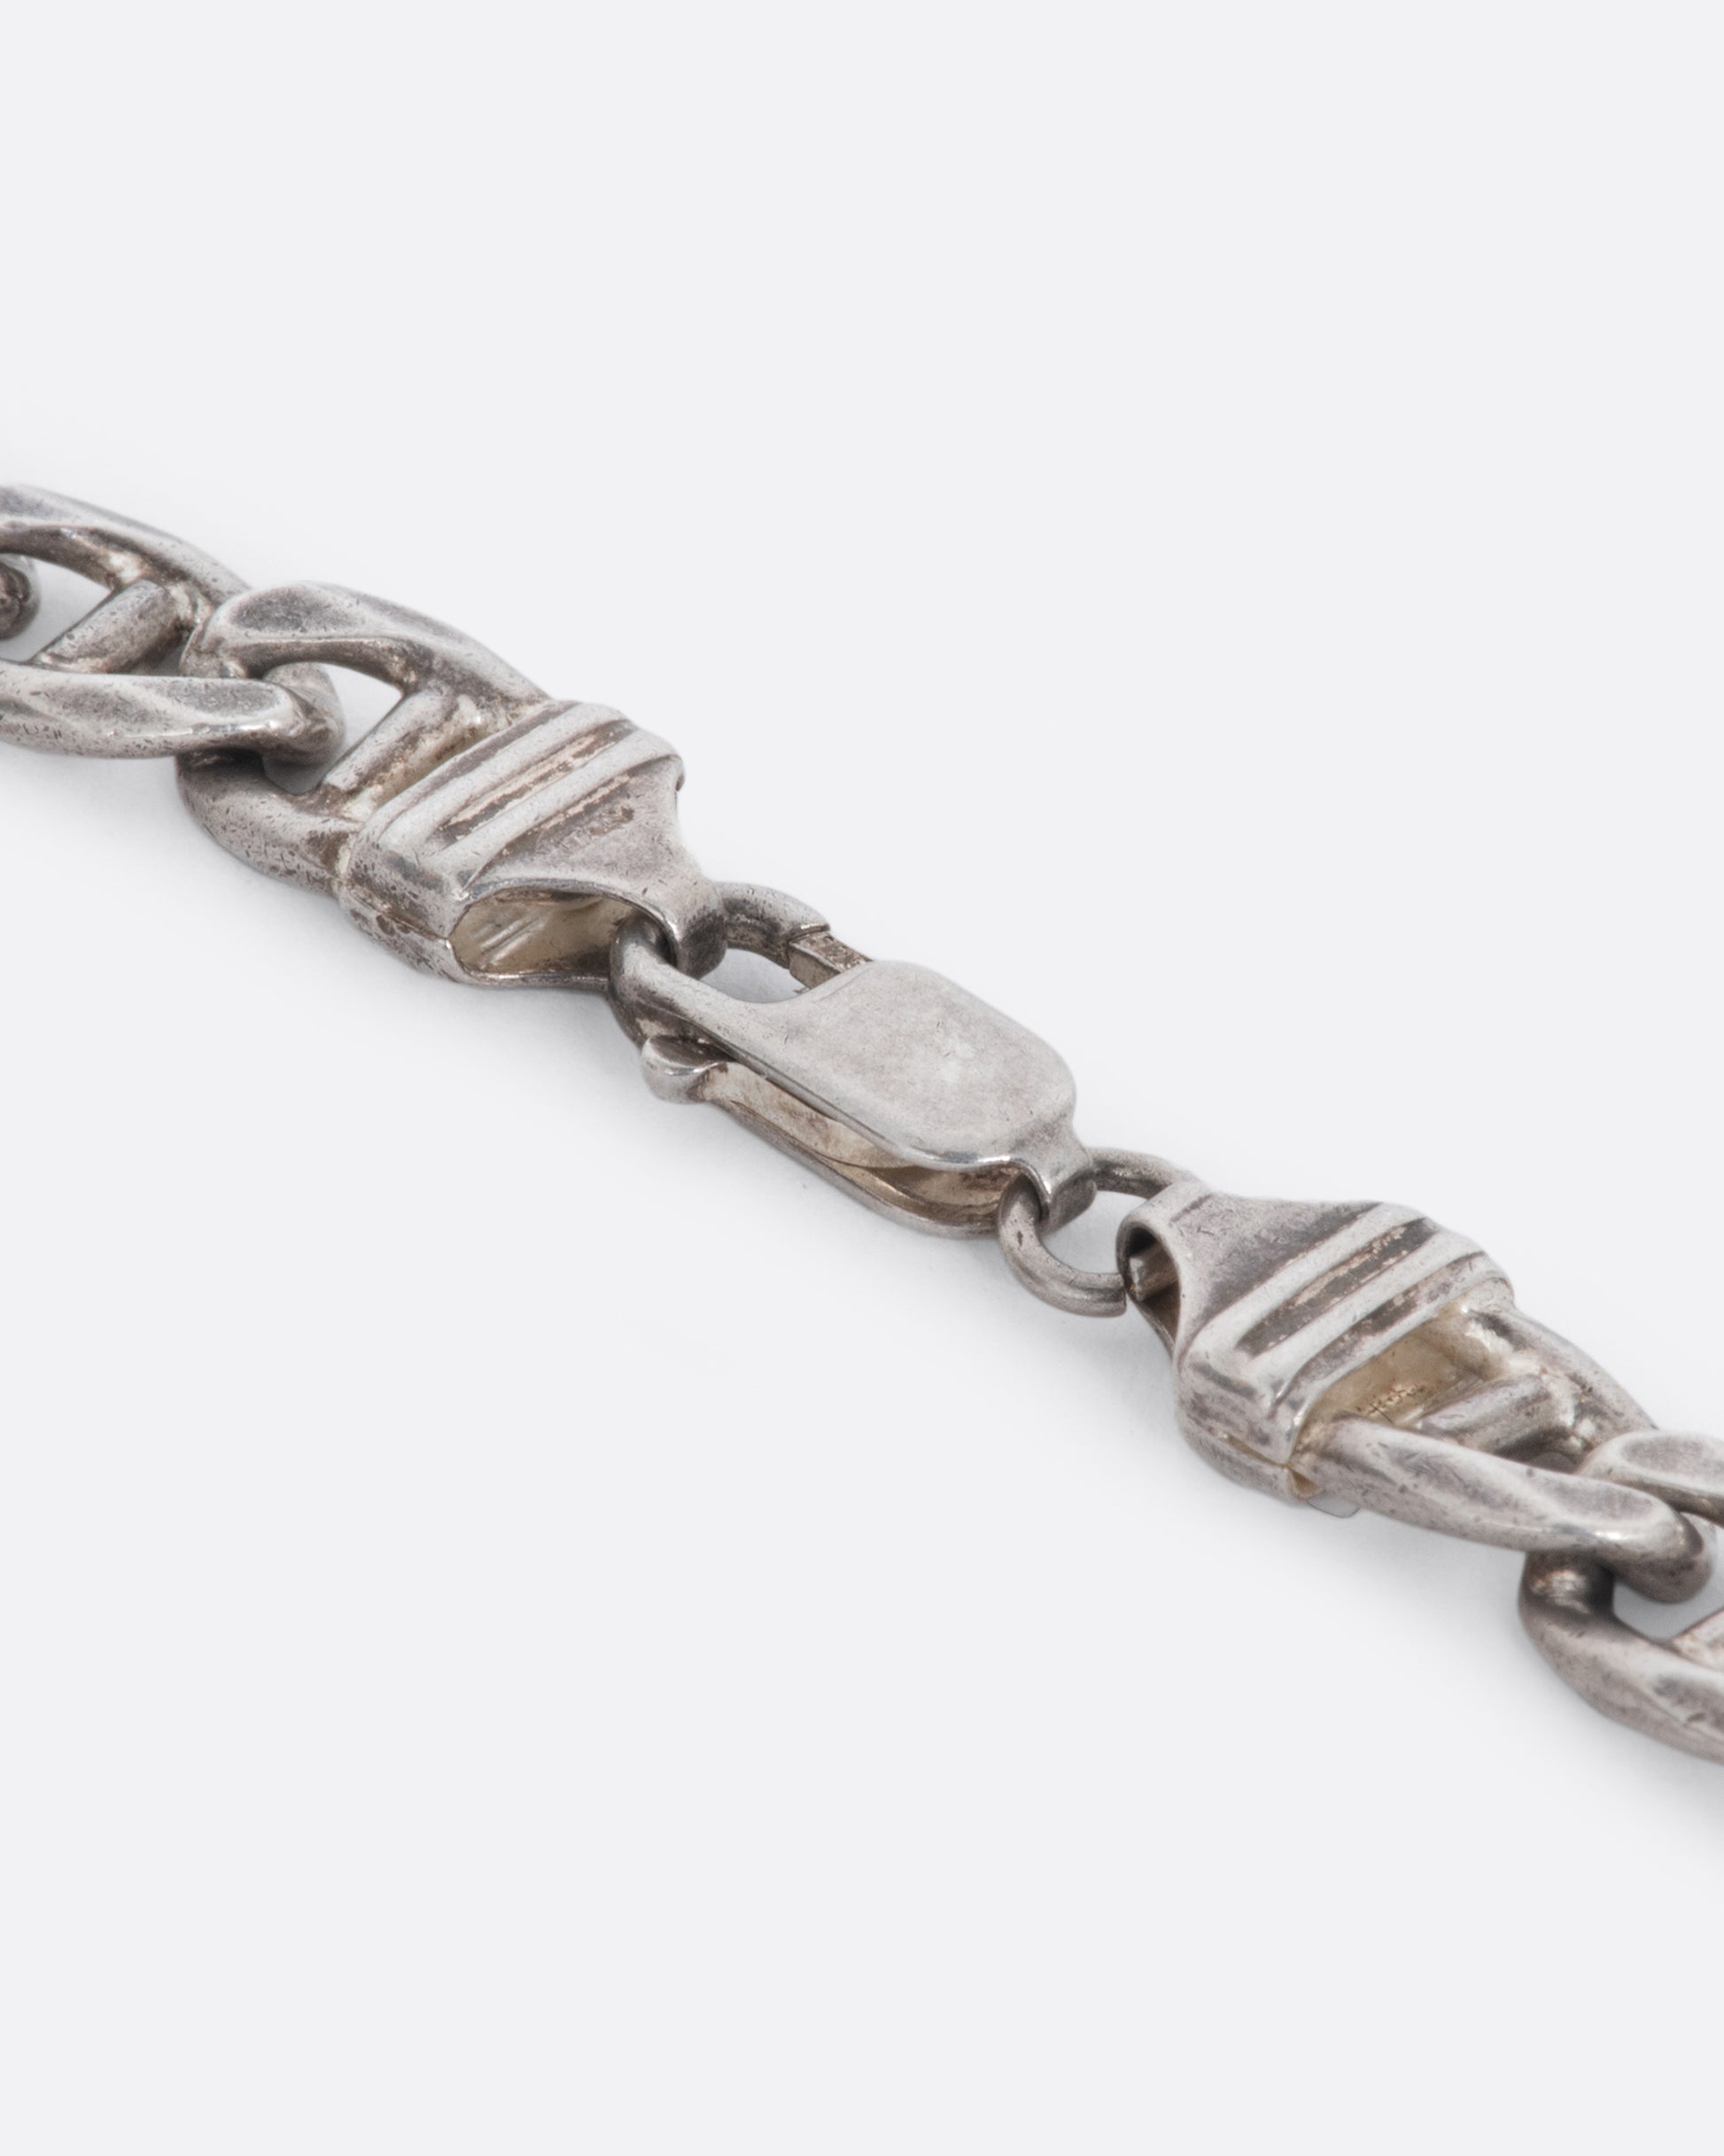 A close up on the clasp of a vintage sterling silver flat mariner chain necklace.